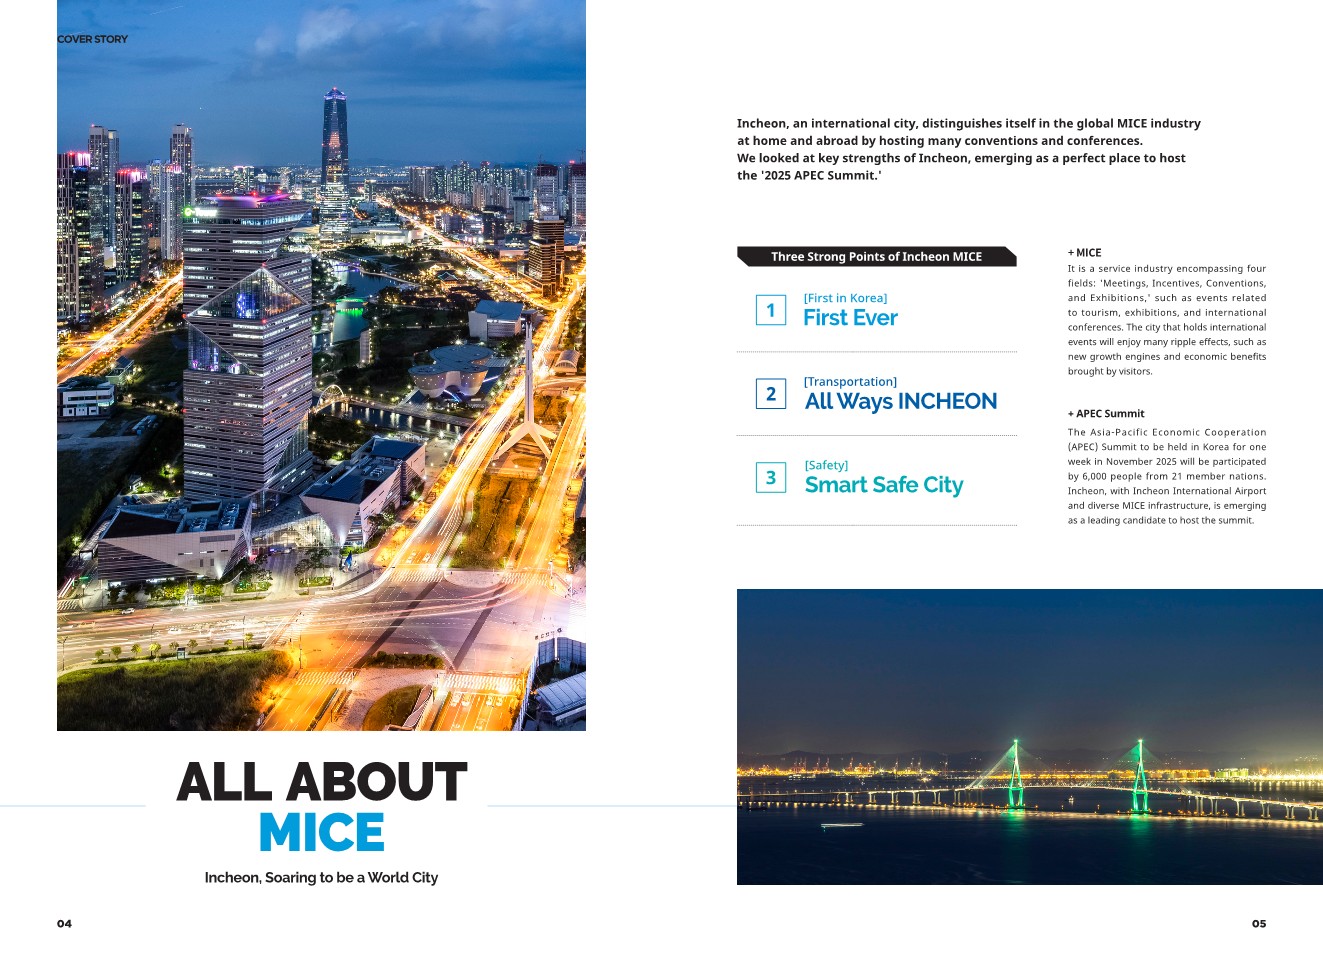 Cover Story] All about 'MICE' - Incheon, Soaring into a World City썸네일